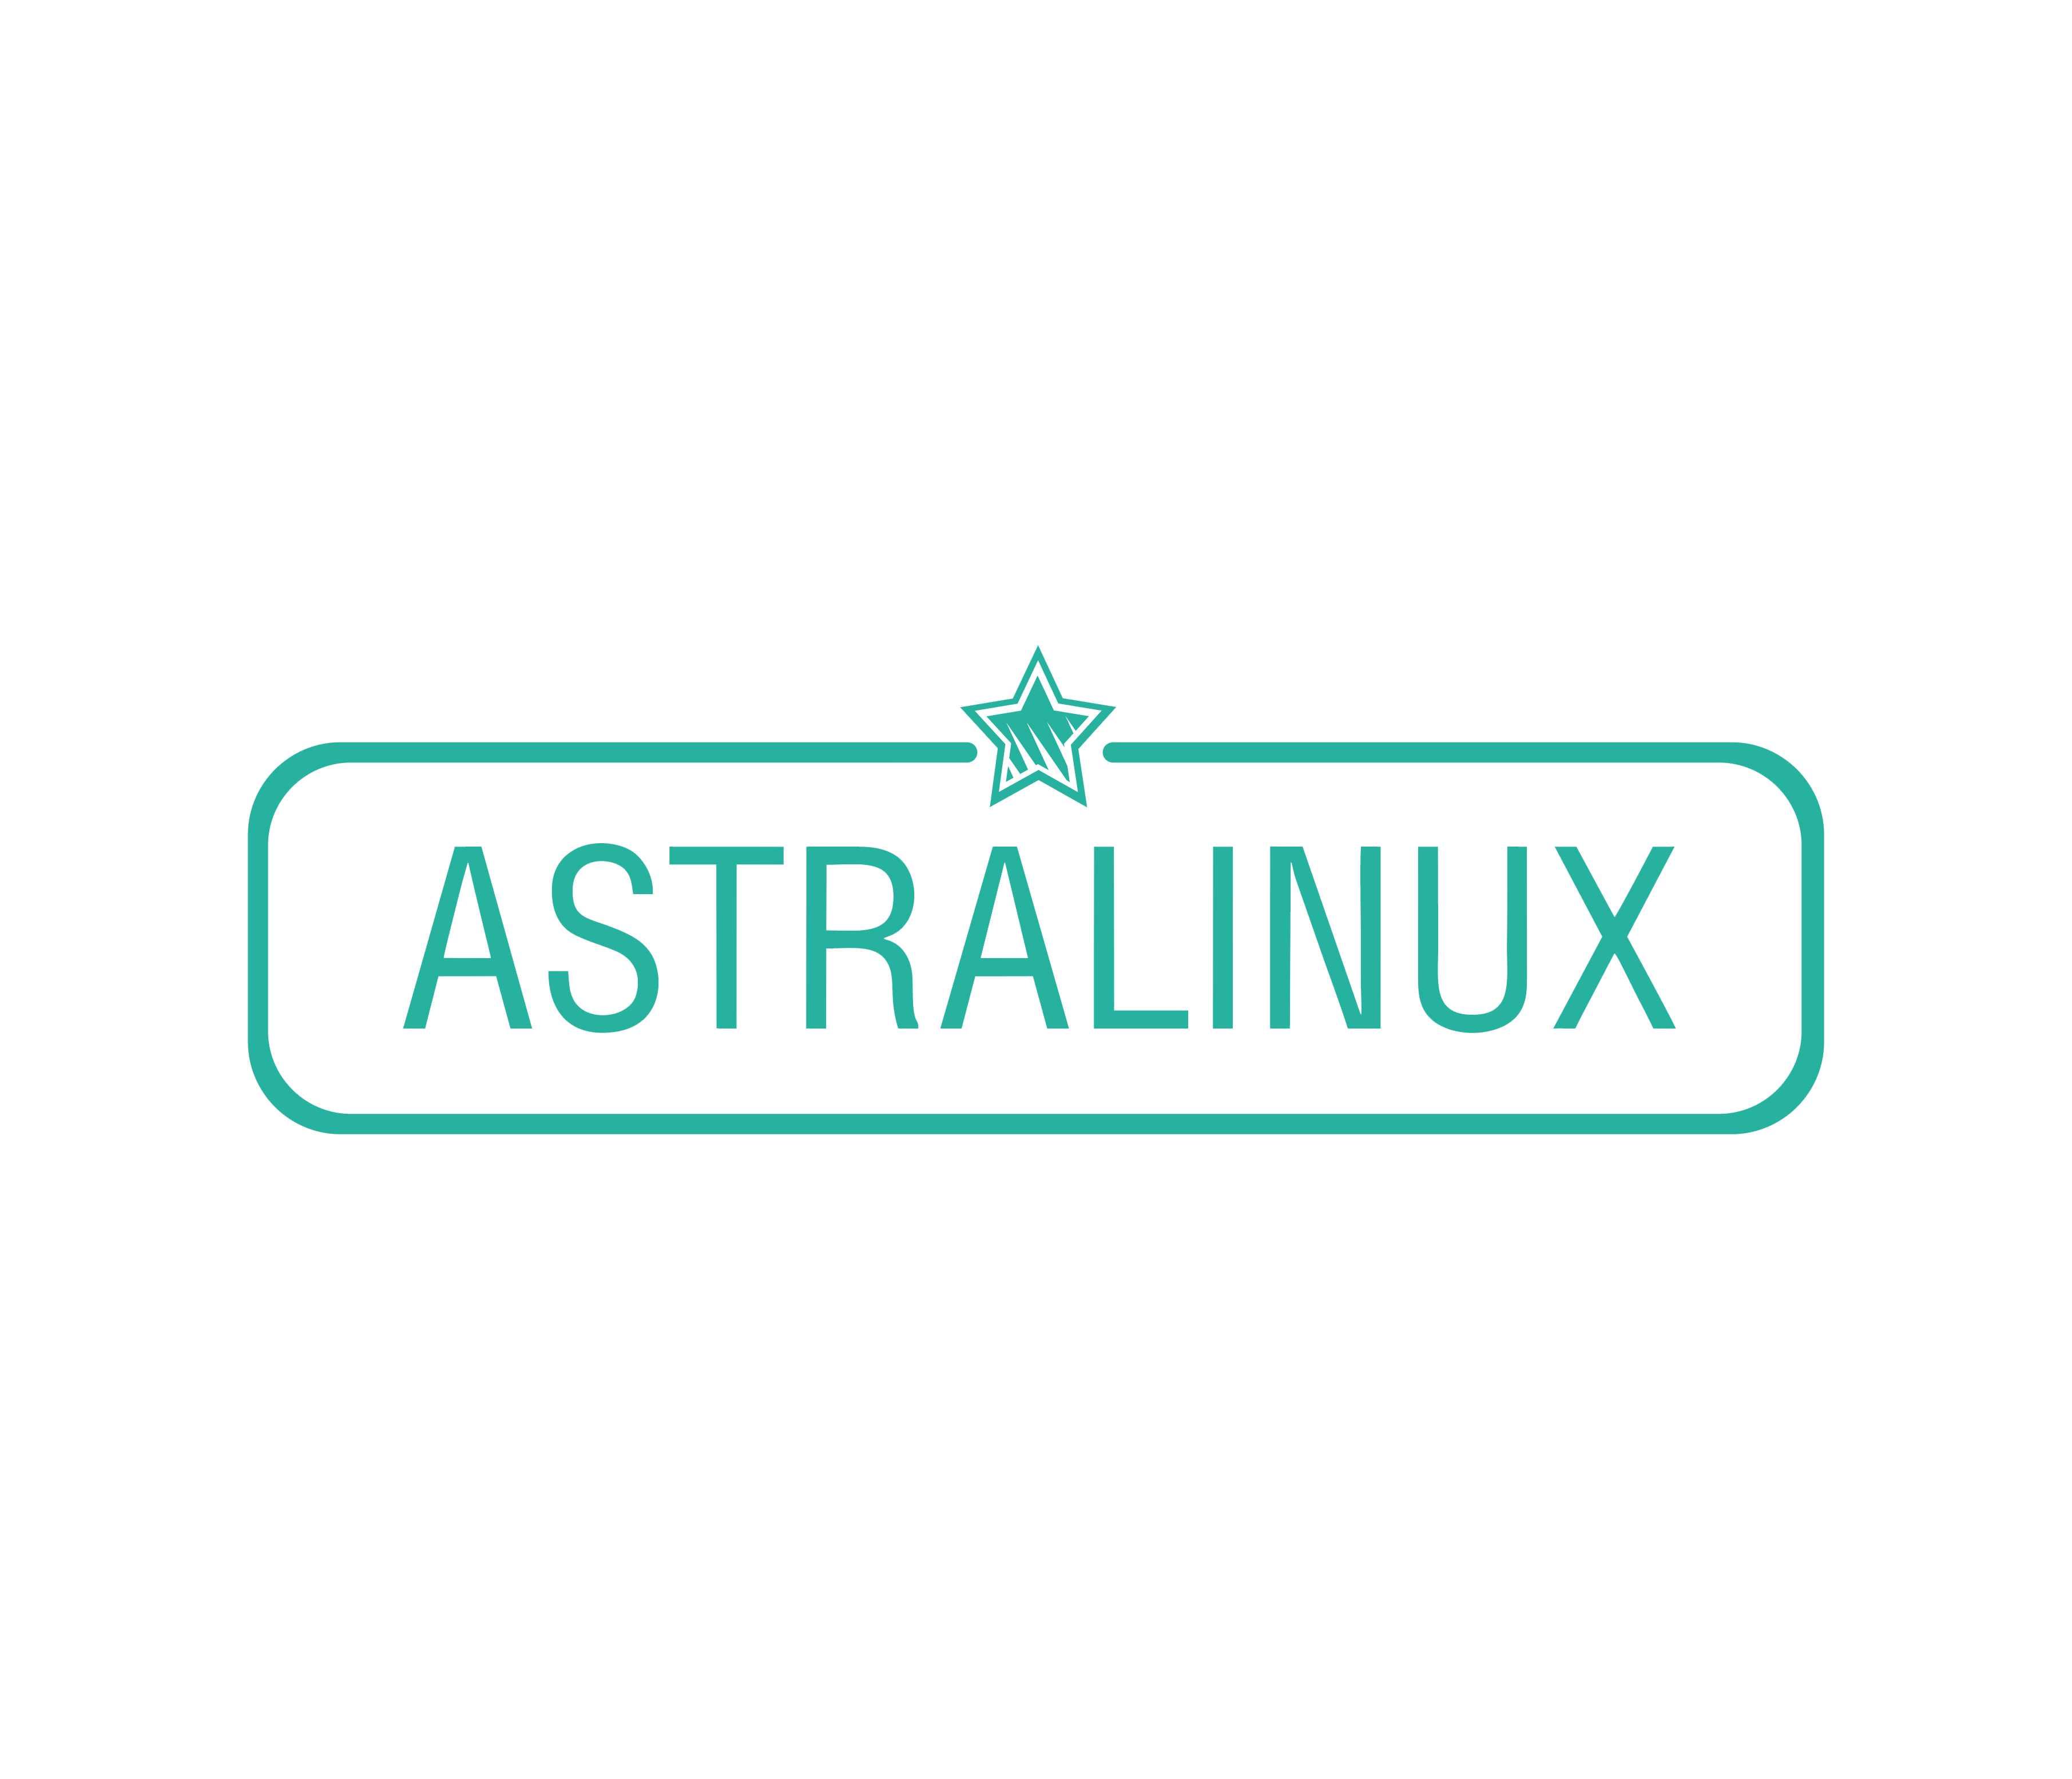 Astra linux разработчик. Astra Linux эмблема. Astra Linux РУСБИТЕХ. Astra Linux Special Edition logo. ОС Astra Linux.